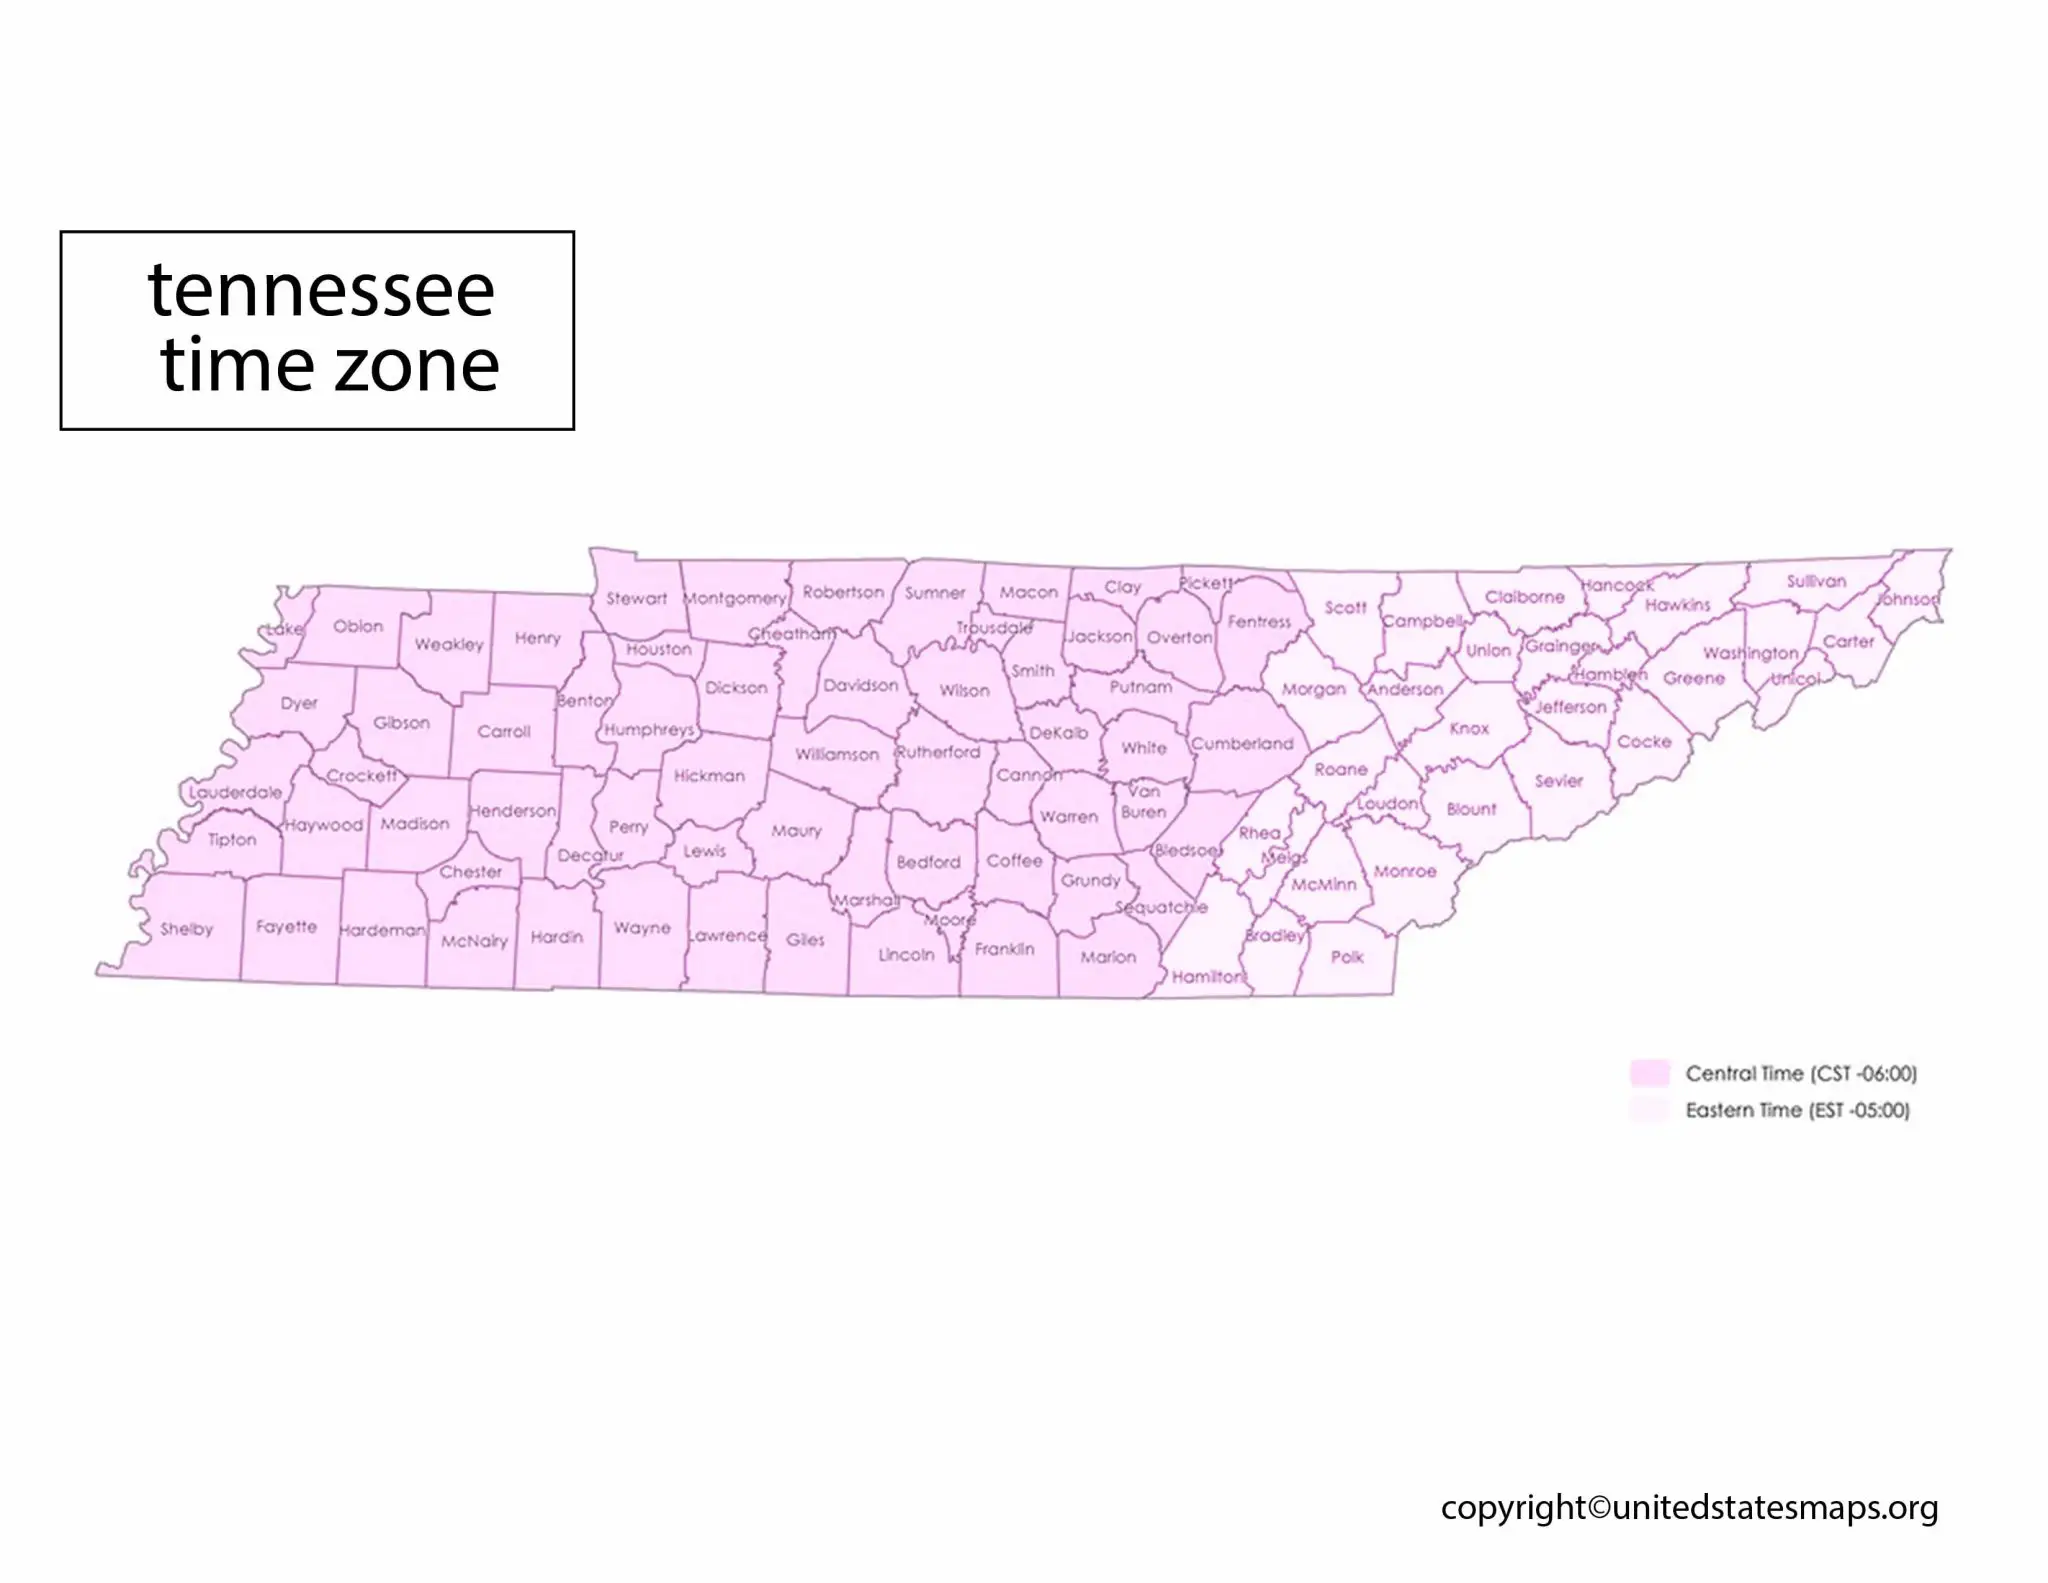 tennessee time zones map